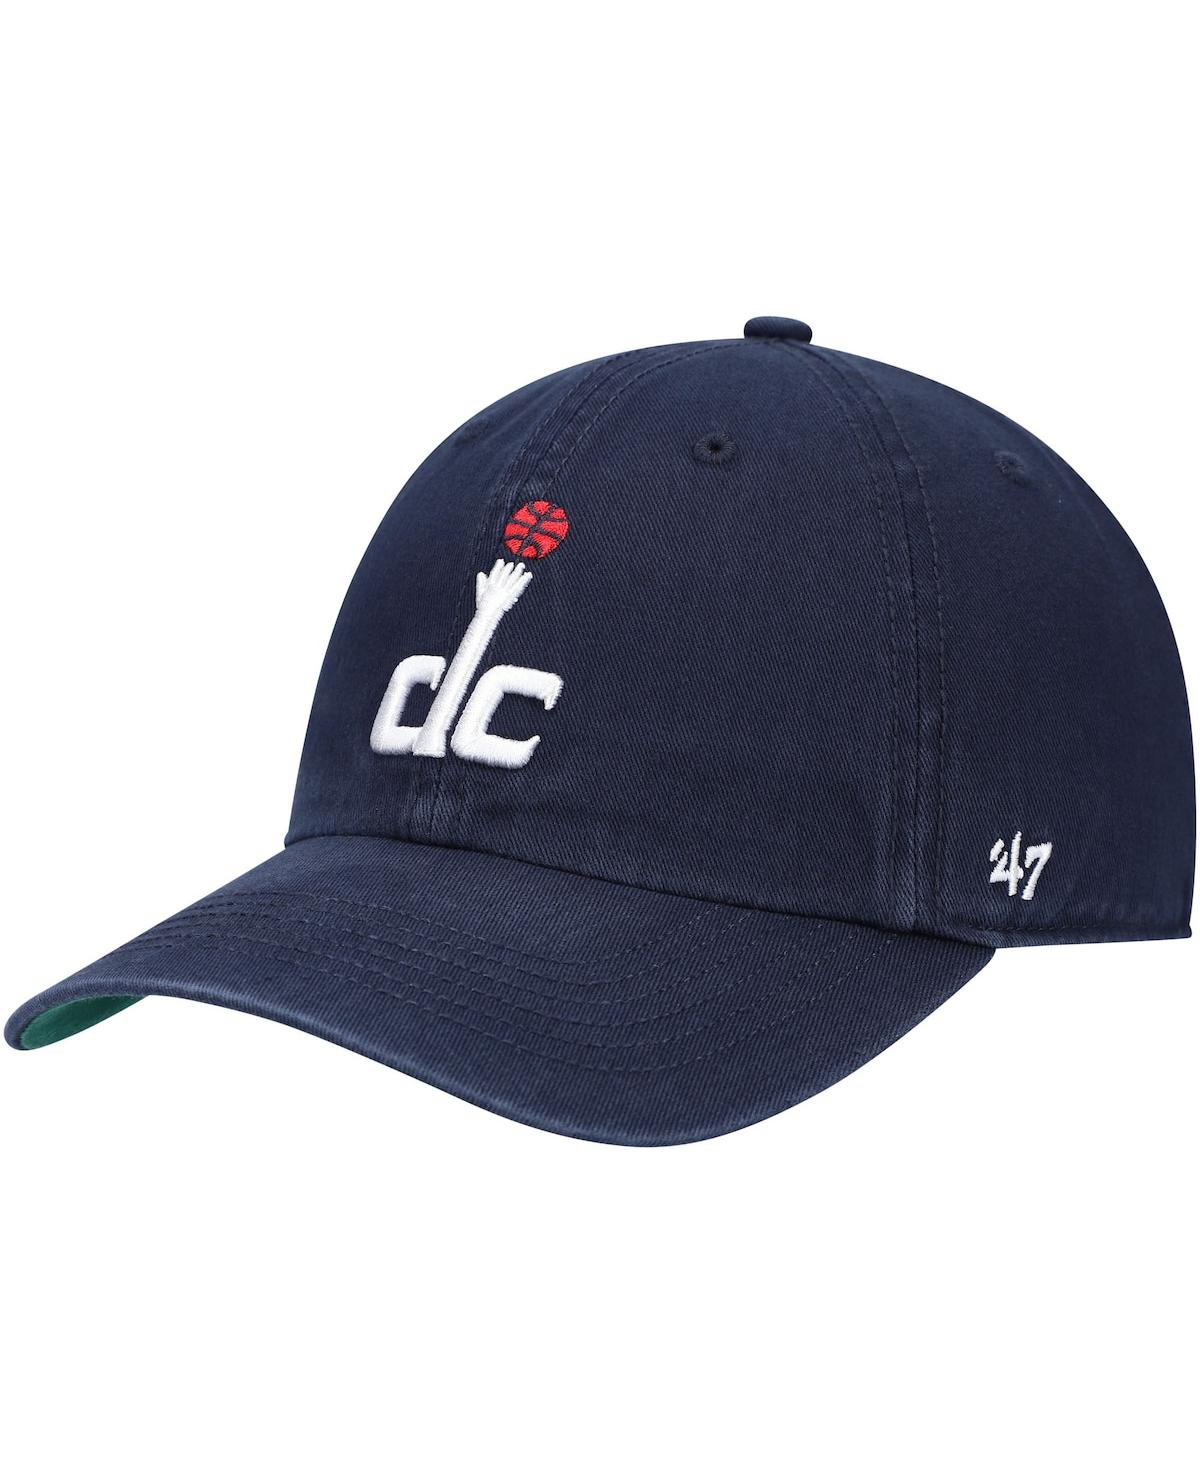 Men's Navy Washington Wizards Team Franchise Fitted Hat - Navy